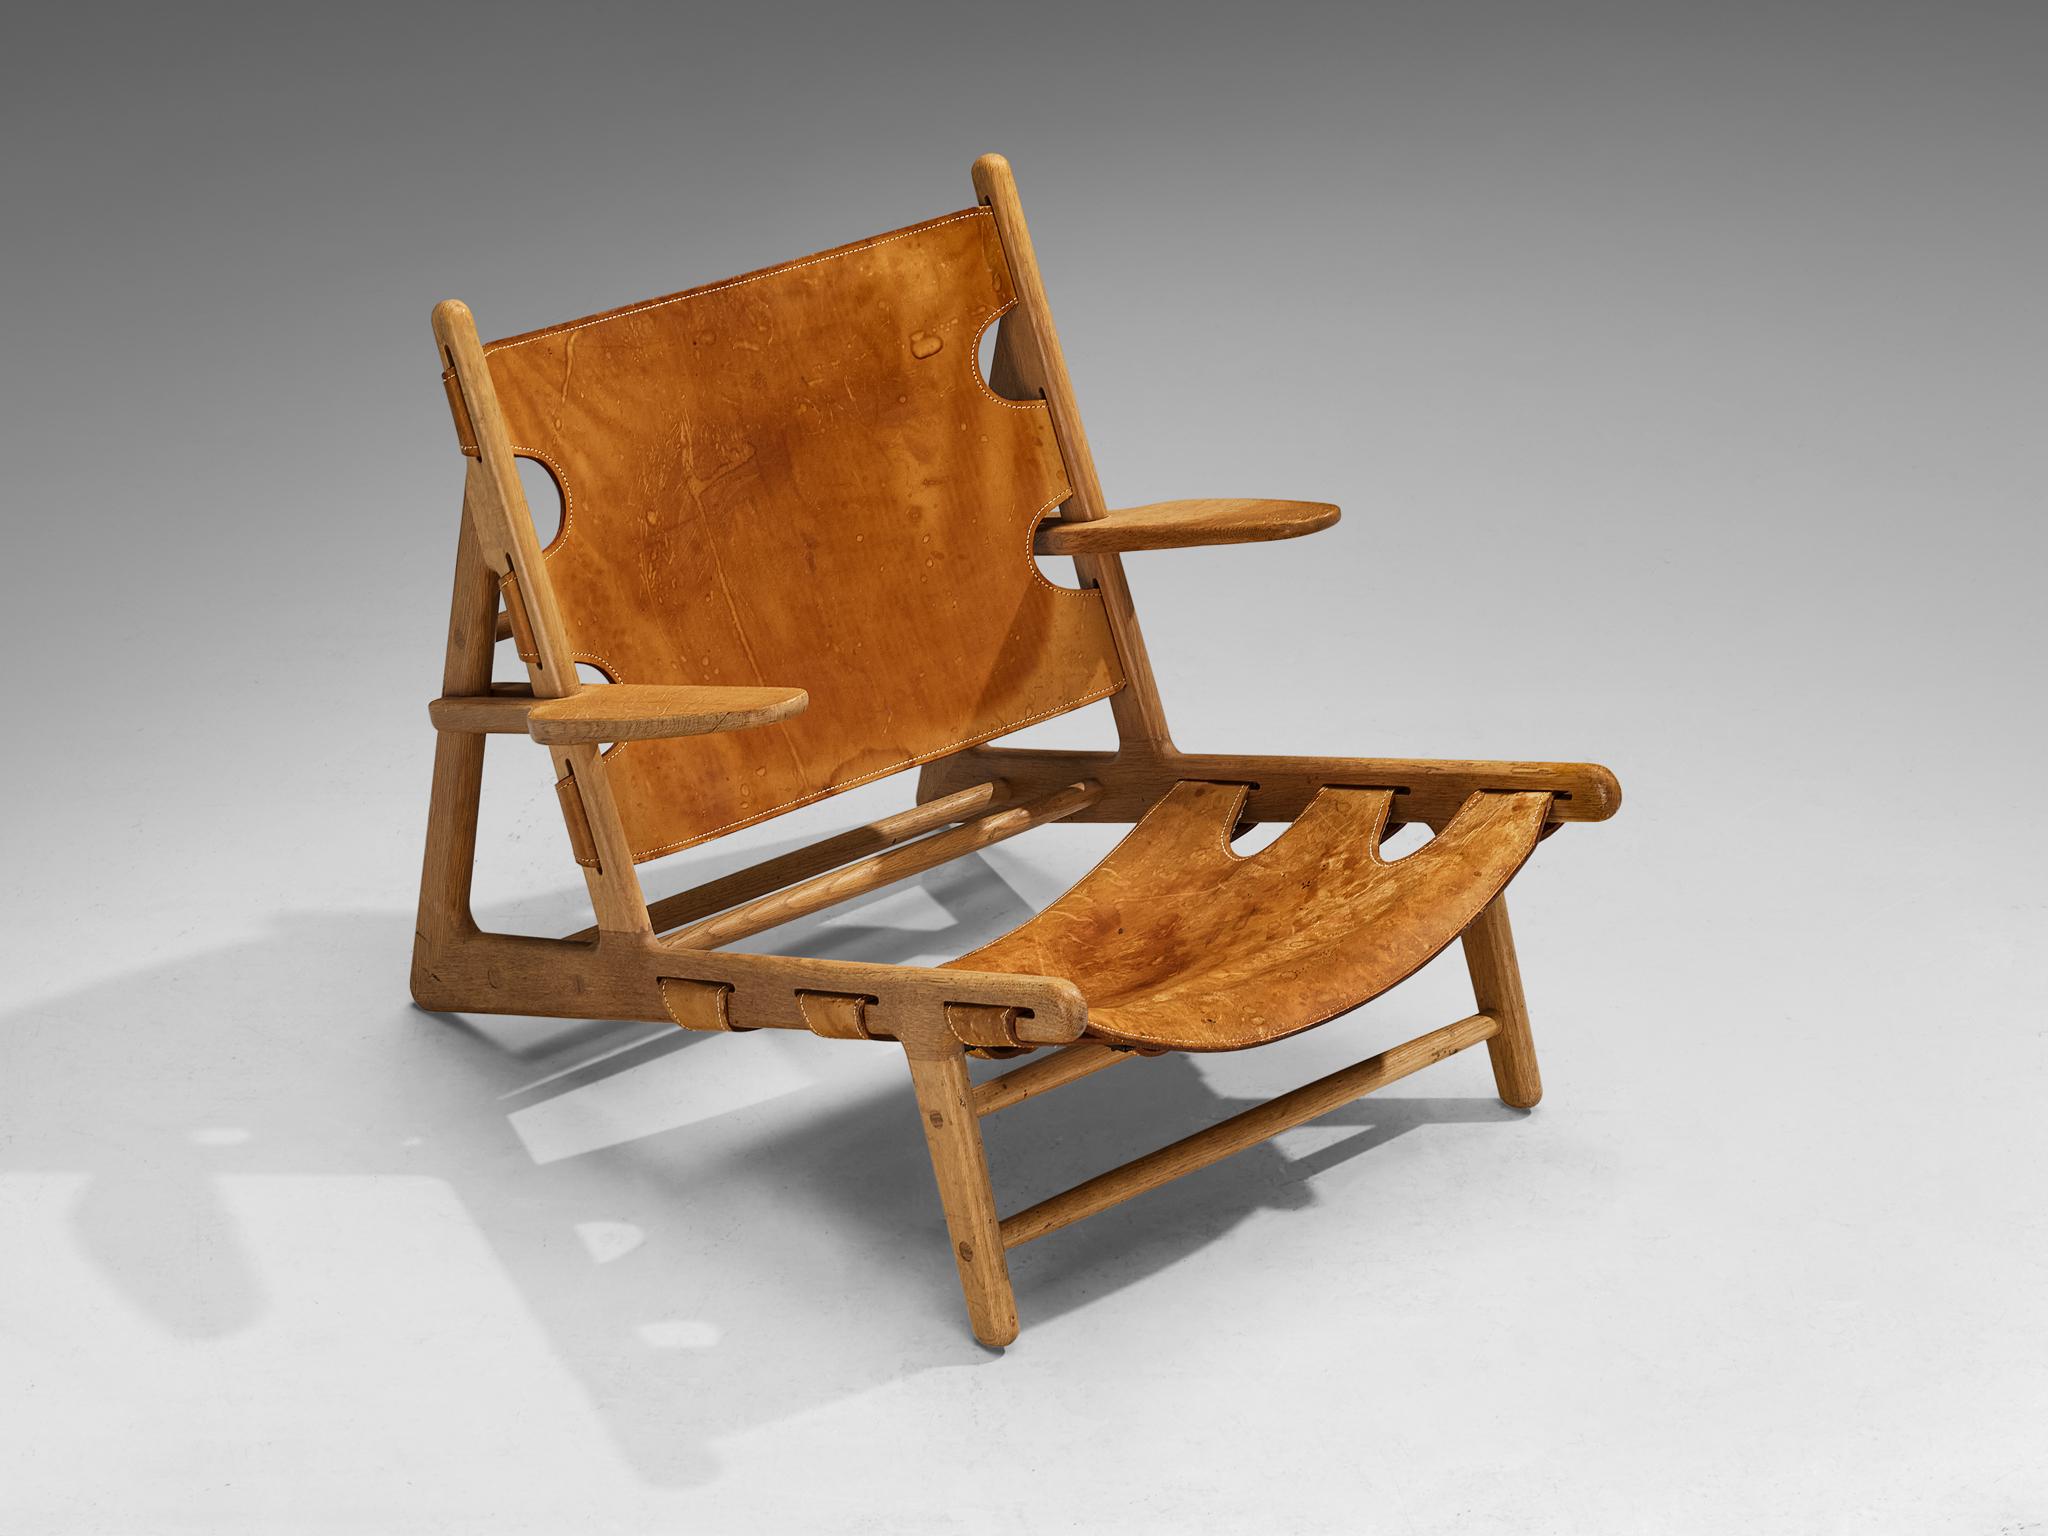 Børge Mogensen for Federicia model 'Hunting Chair', Sweden, 1960s

Hunting chair, designed by Børge Mogensen in 1950 for the Cabinetmakers Guild Exhibition. The theme of the exhibition was 'Huntin Cabin'. Therefore Mogensen created this chair,